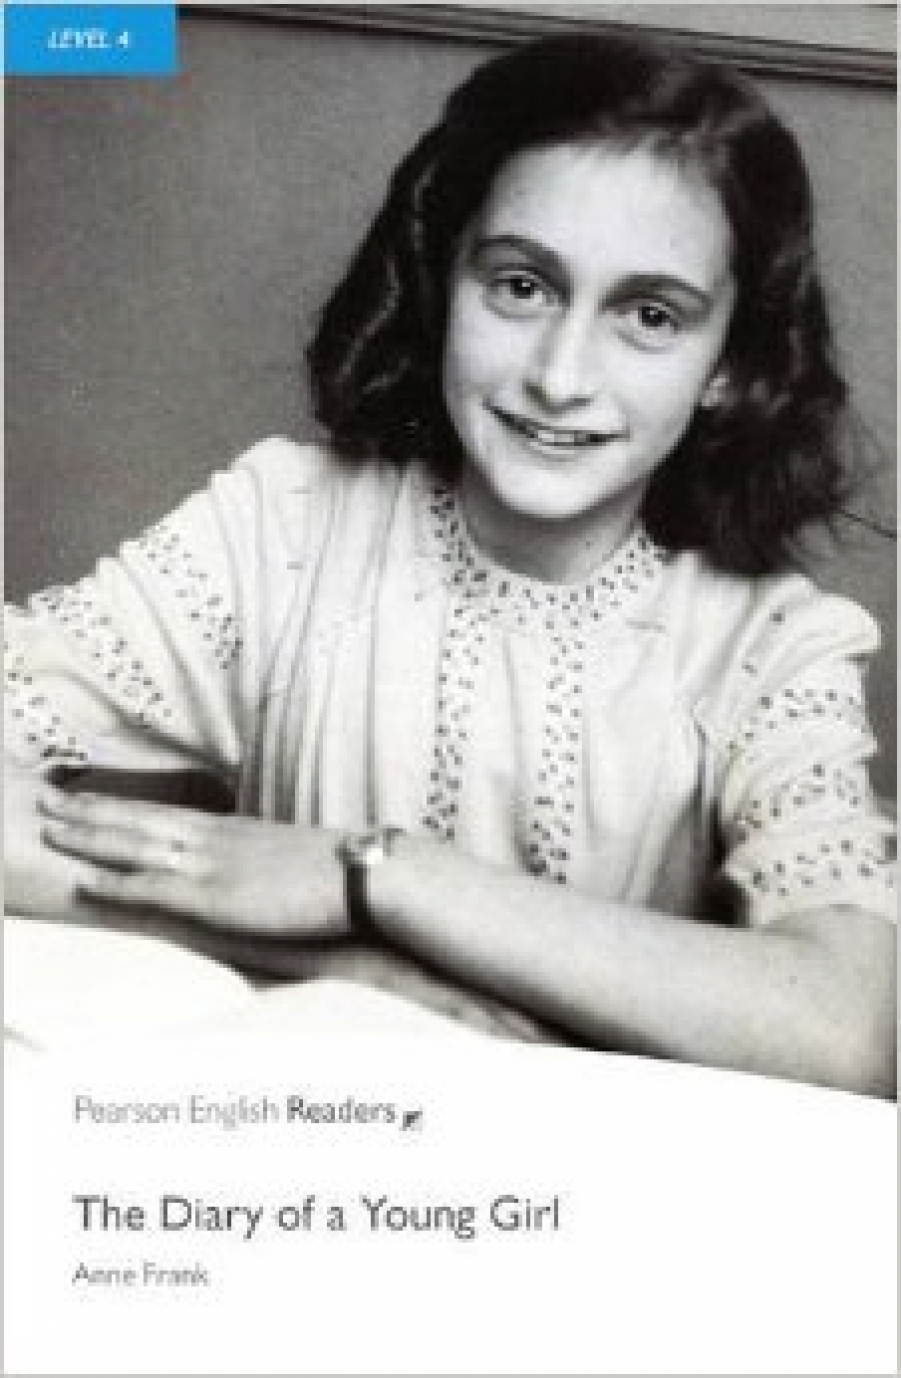 Anne, Frank Diary of a Young Girl Book /MP3 Pk 